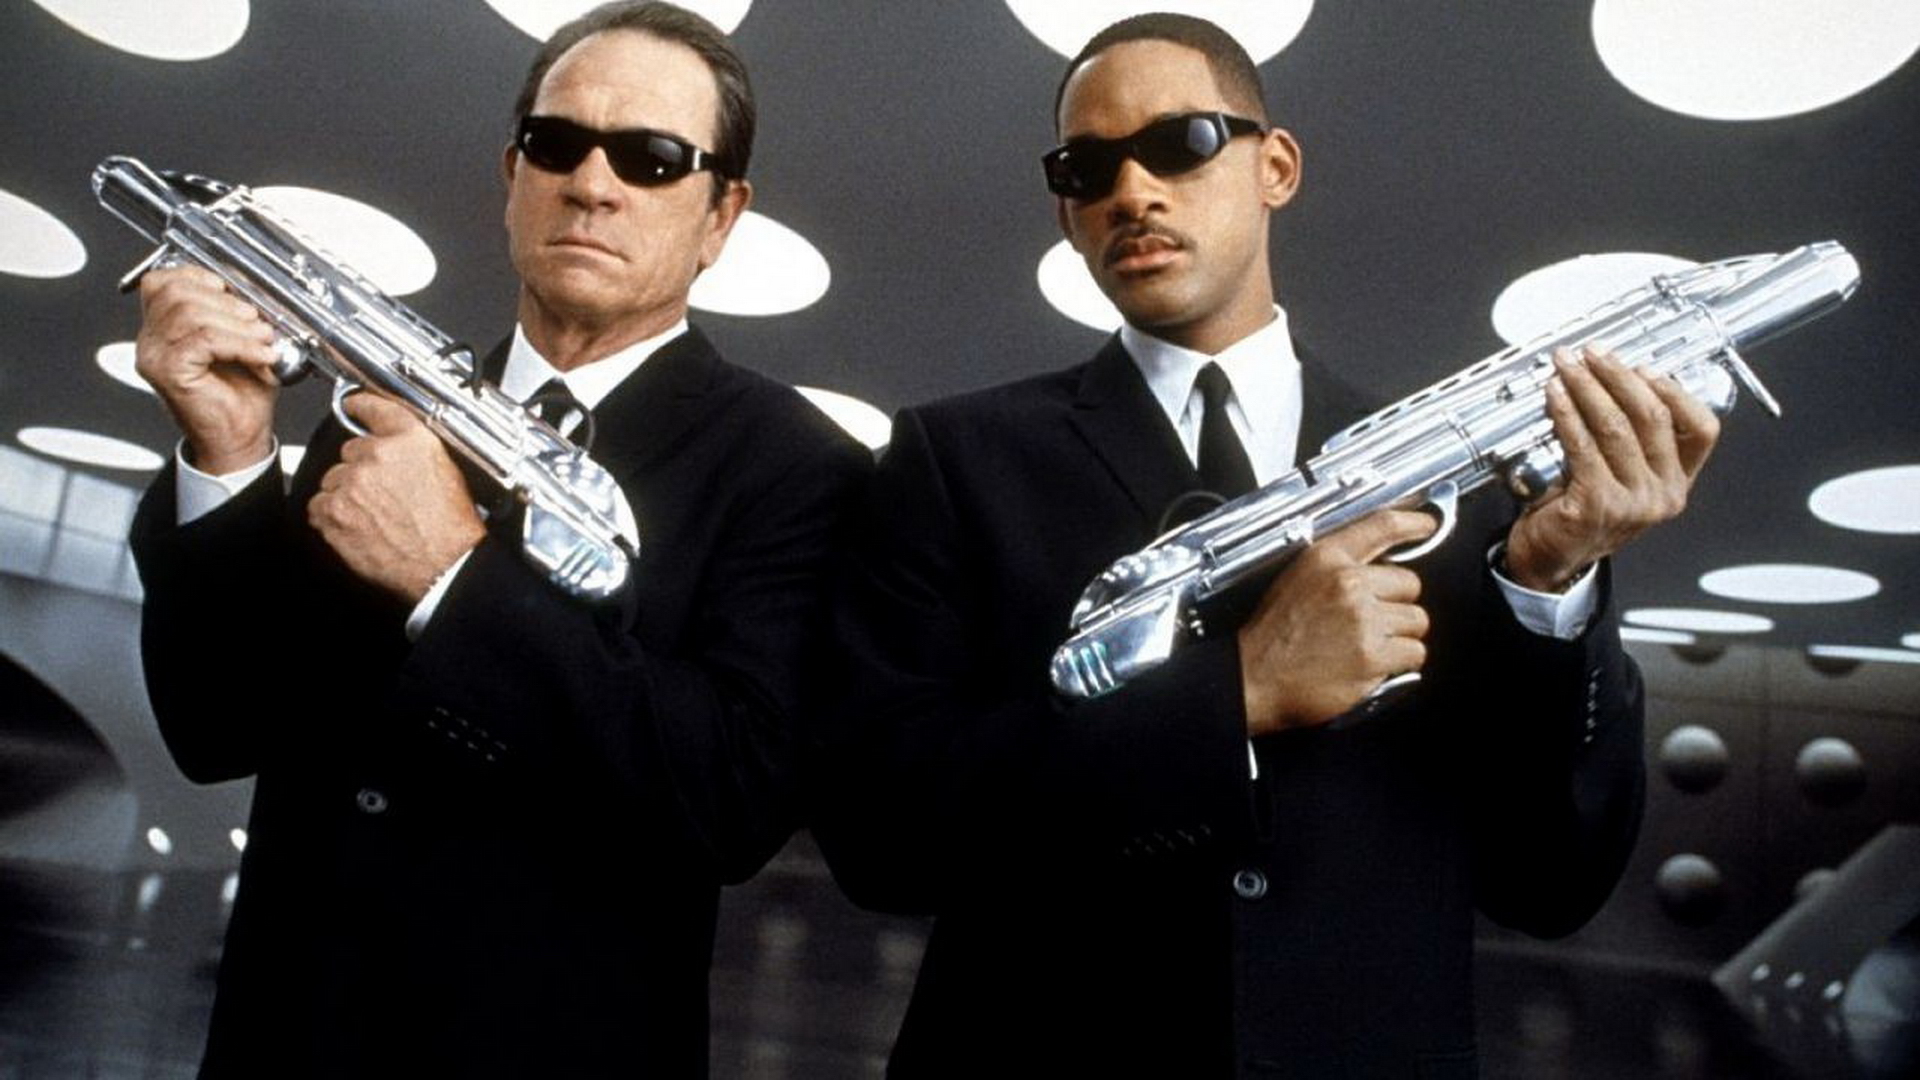 10 Things You Didn't Know About Men In Black